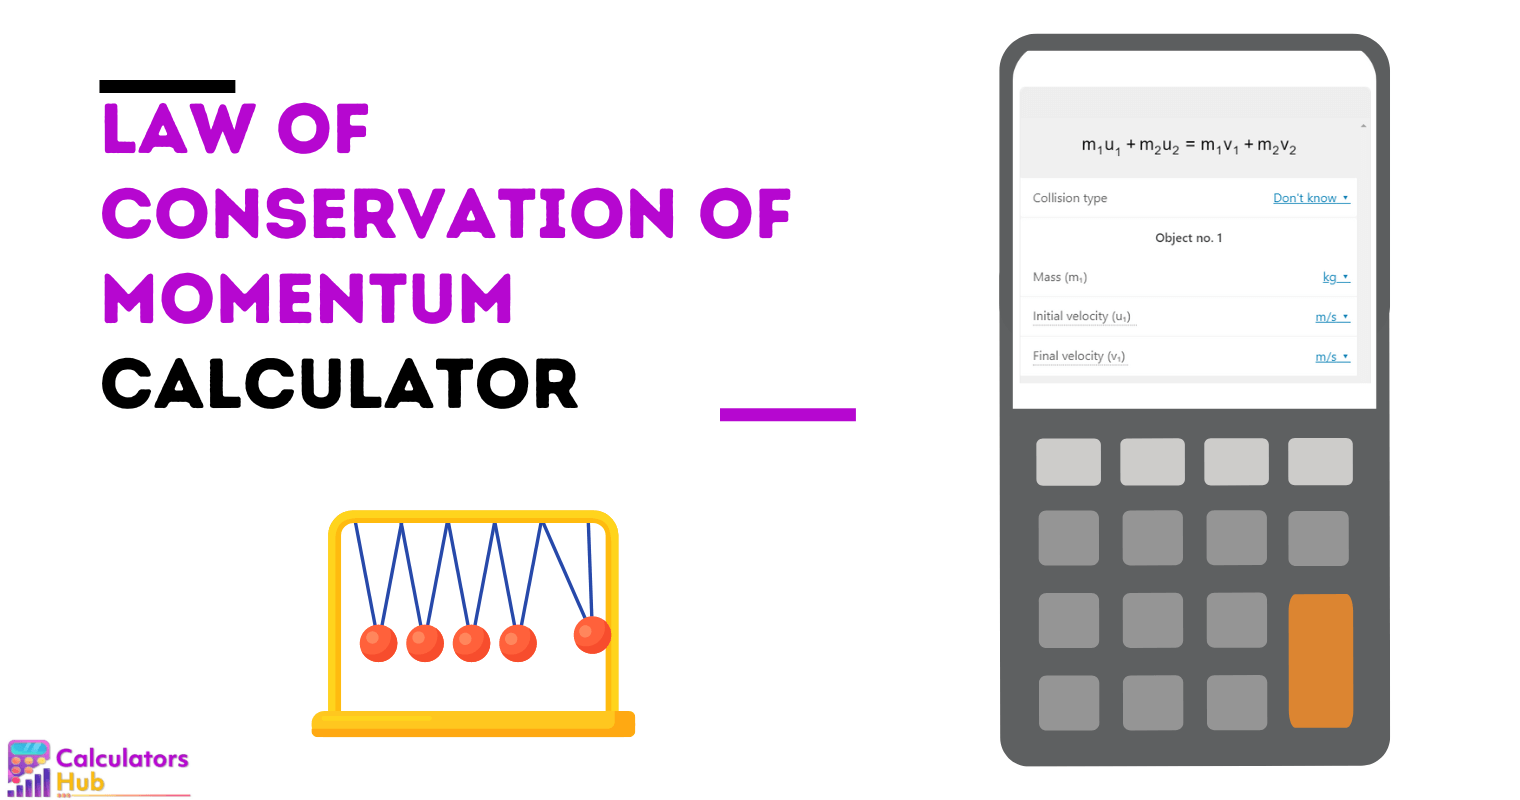 Law of Conservation of Momentum Calculator